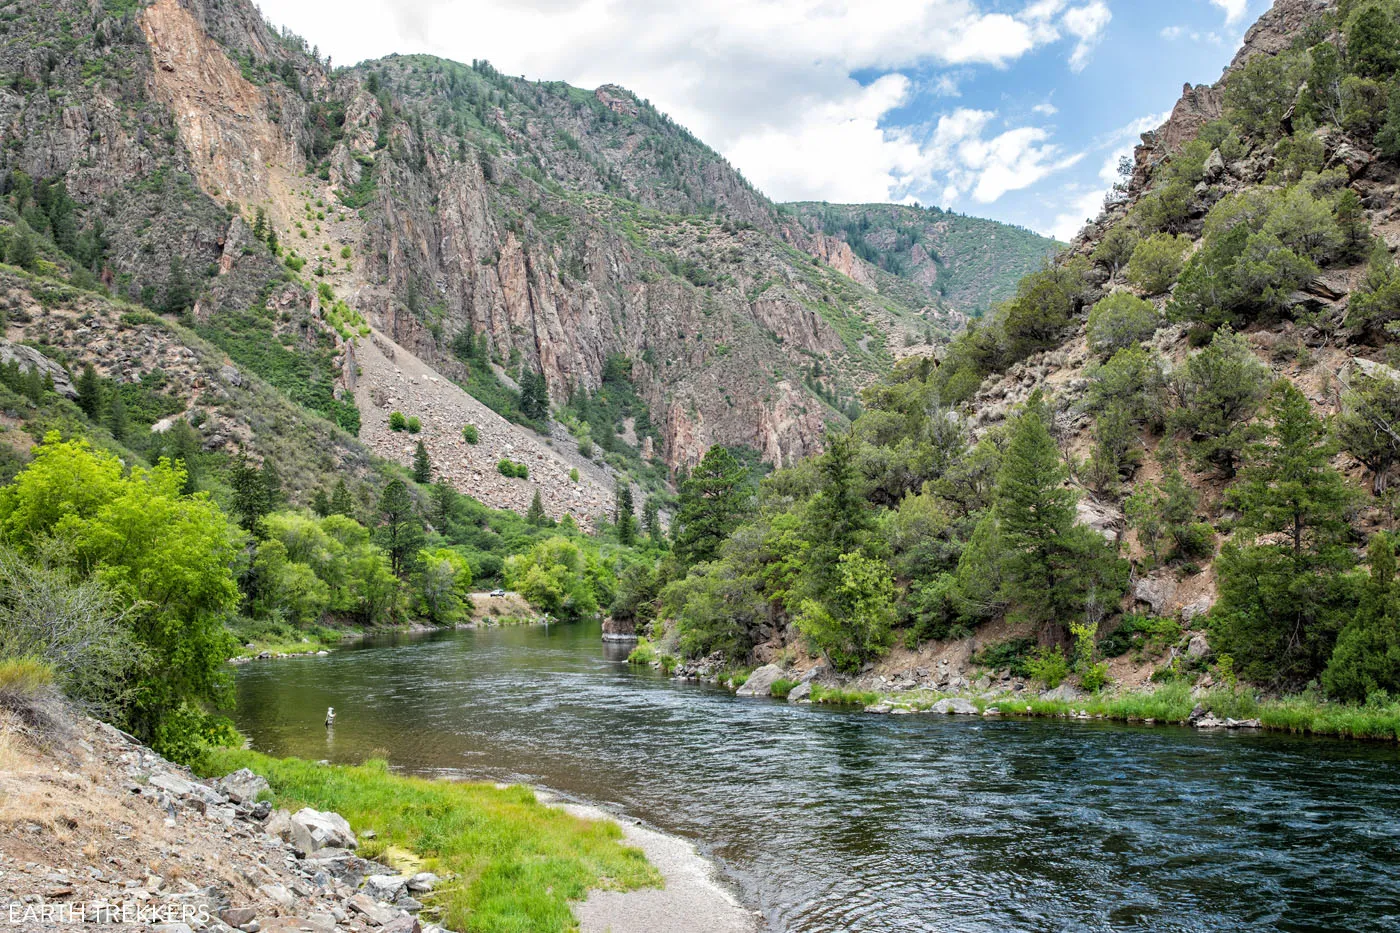 Gunnison River how to visit the Black Canyon of the Gunnison